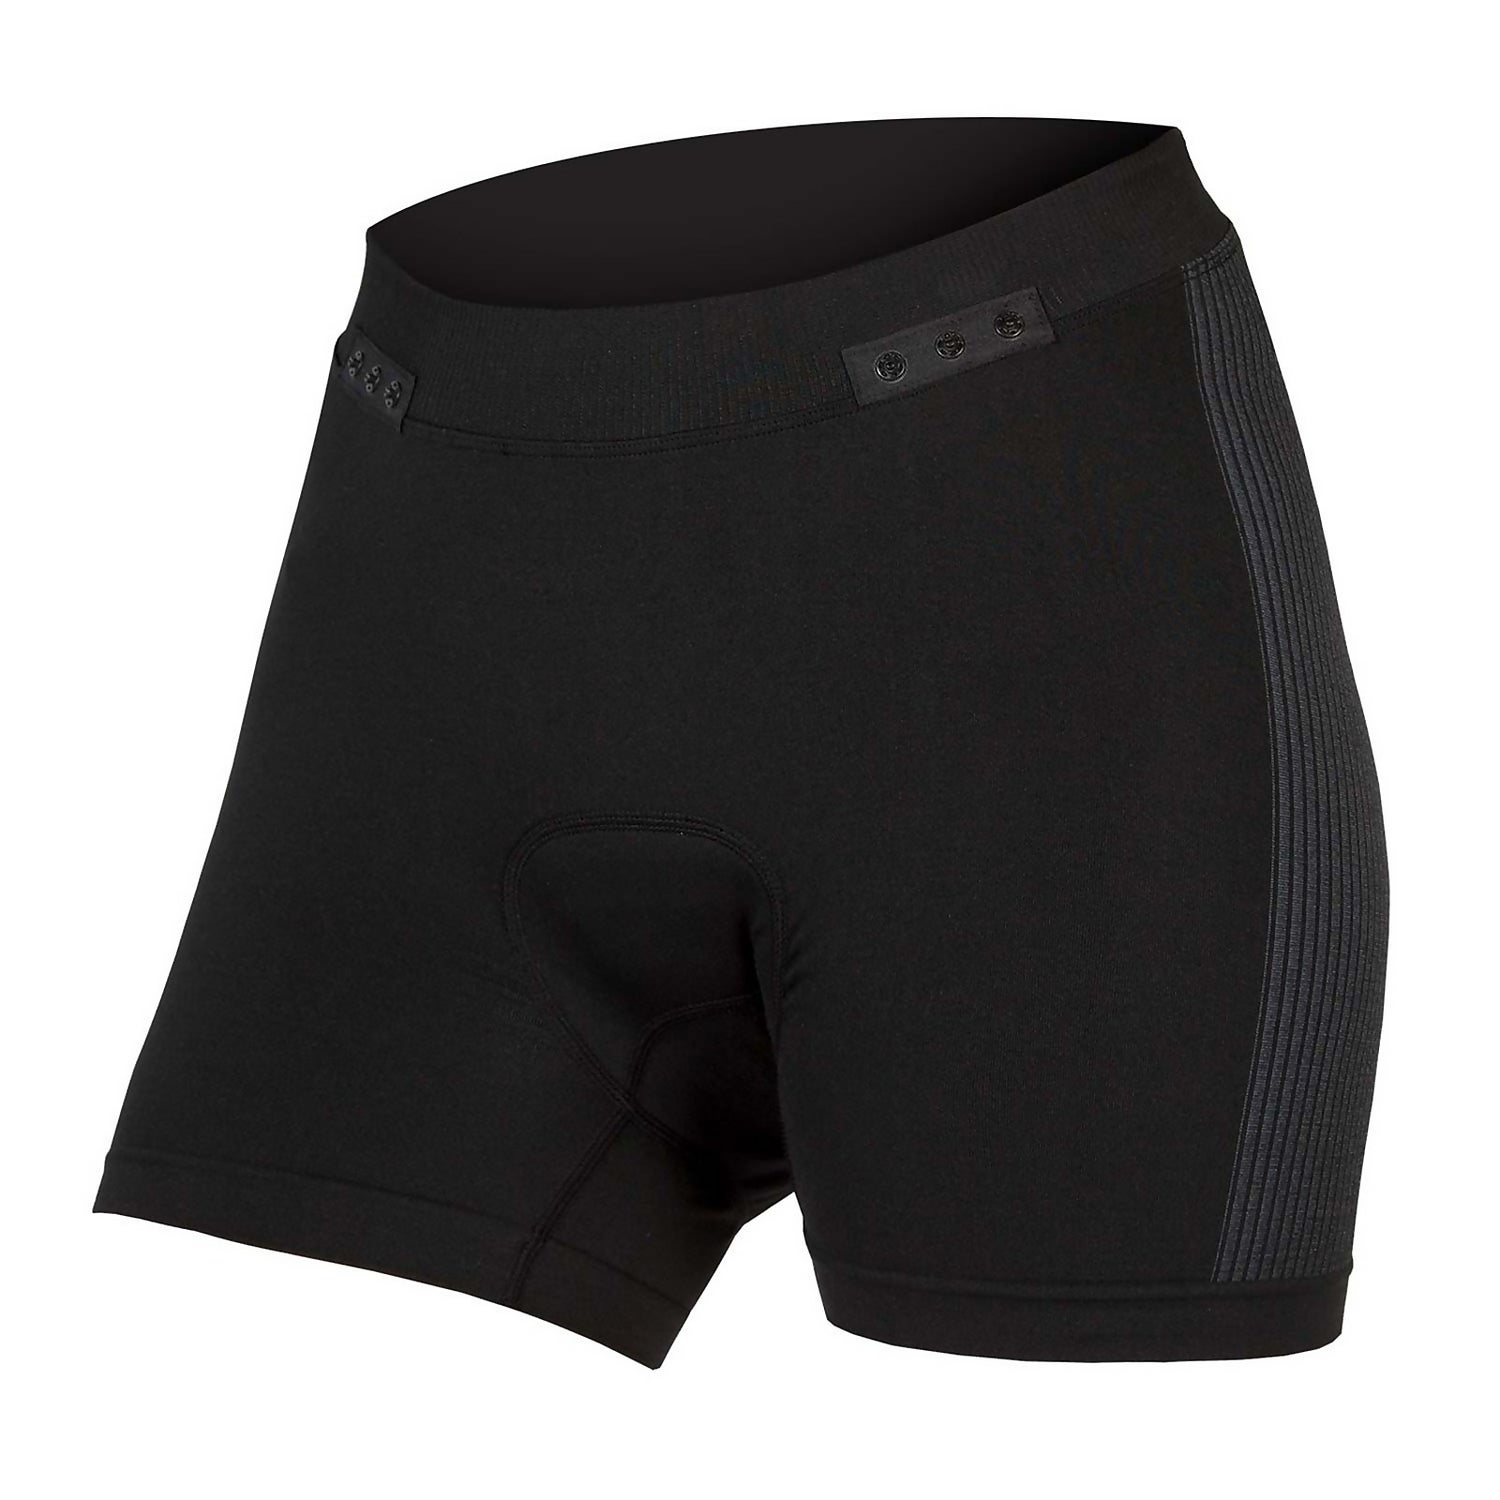 Women's Engineered Padded Boxer with Clickfast - Black - L